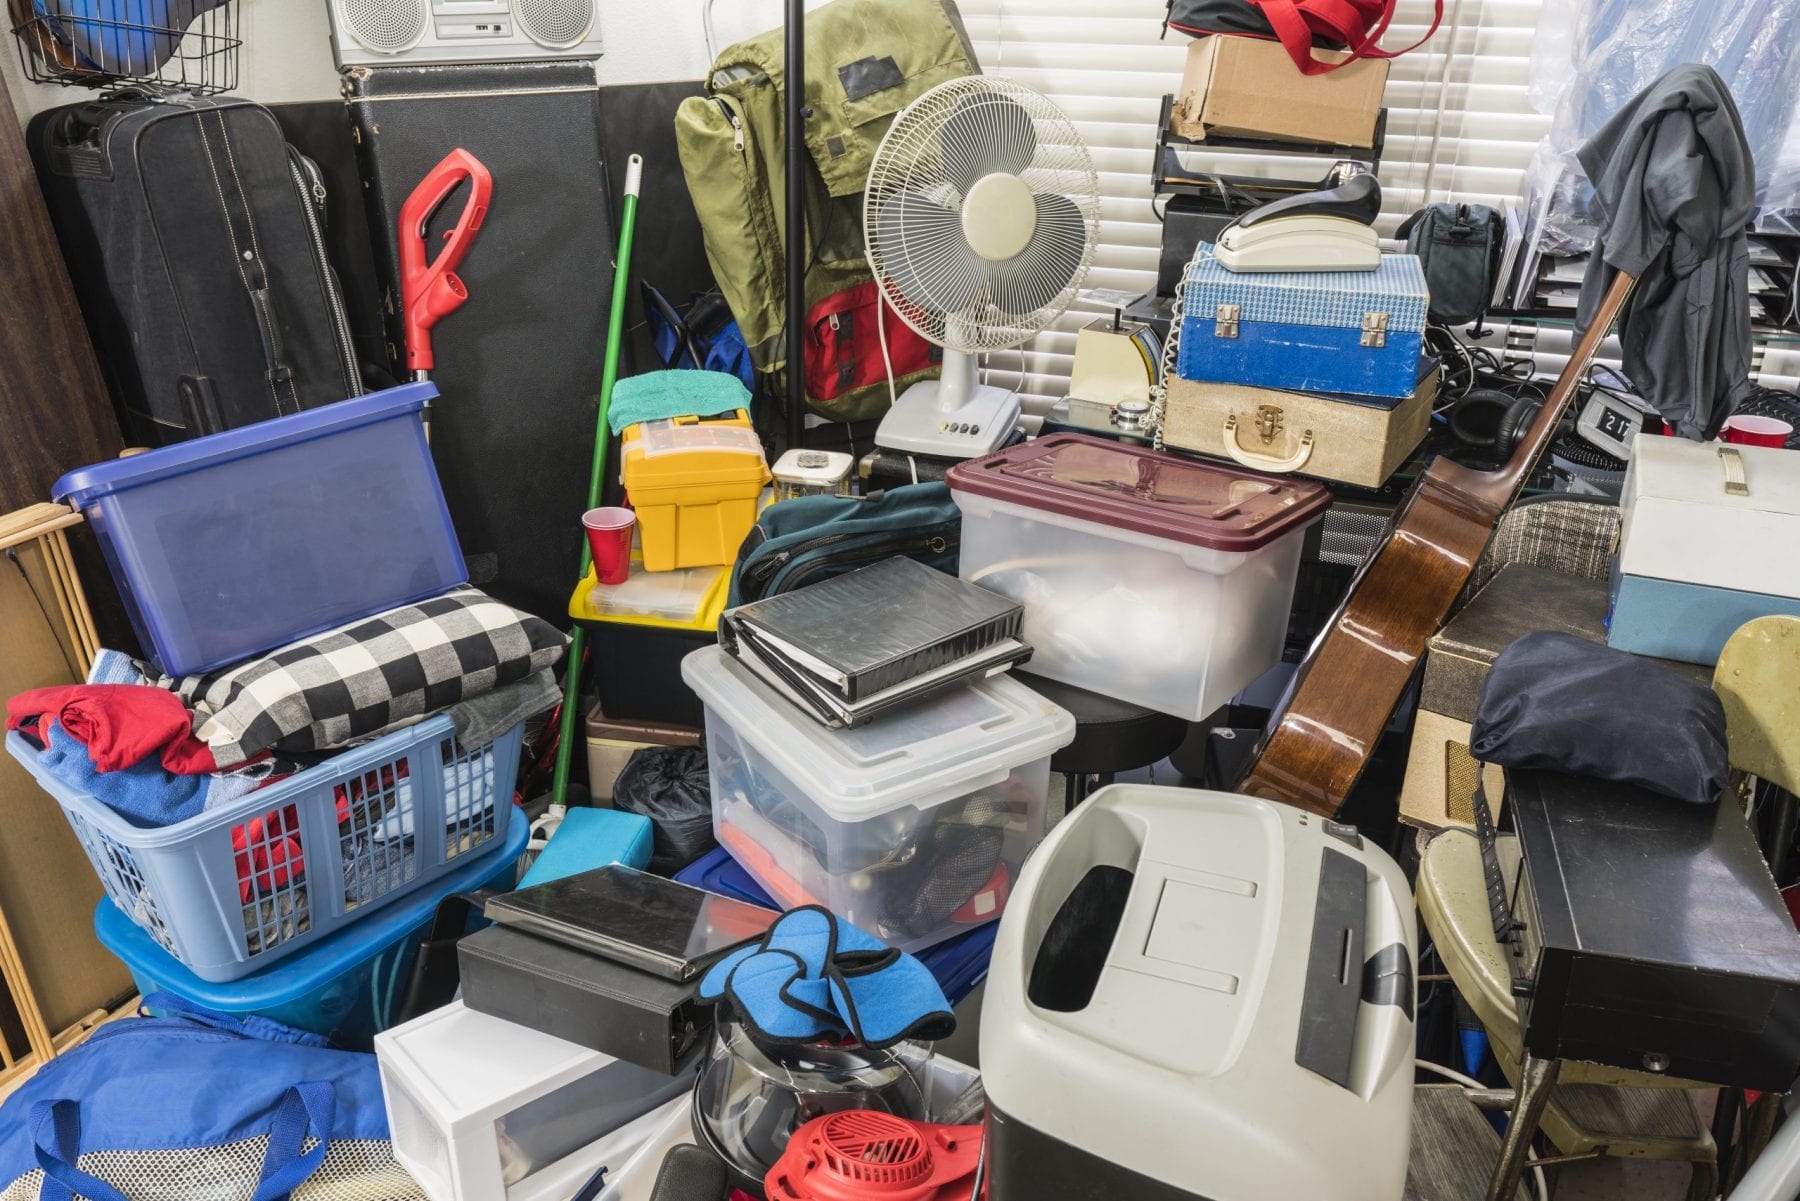 Home packed with stored boxes, vintage electronics, files, business equipment and household items.